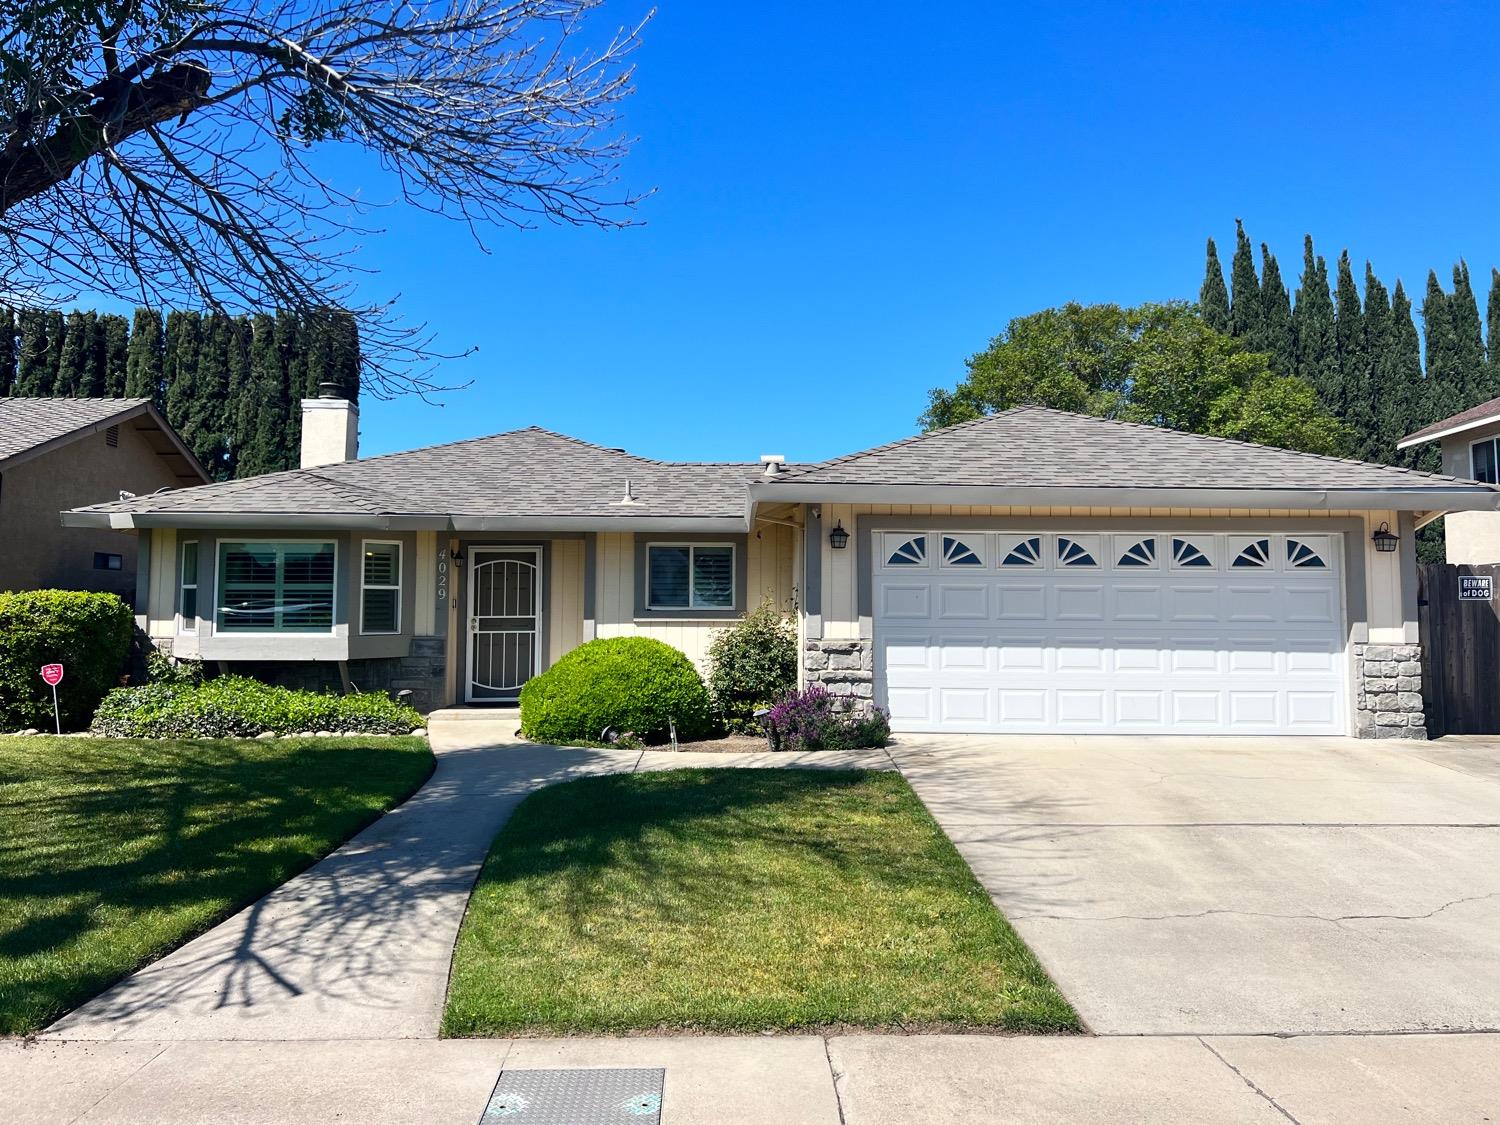 Photo of 4029 Timahoe Dr in Modesto, CA